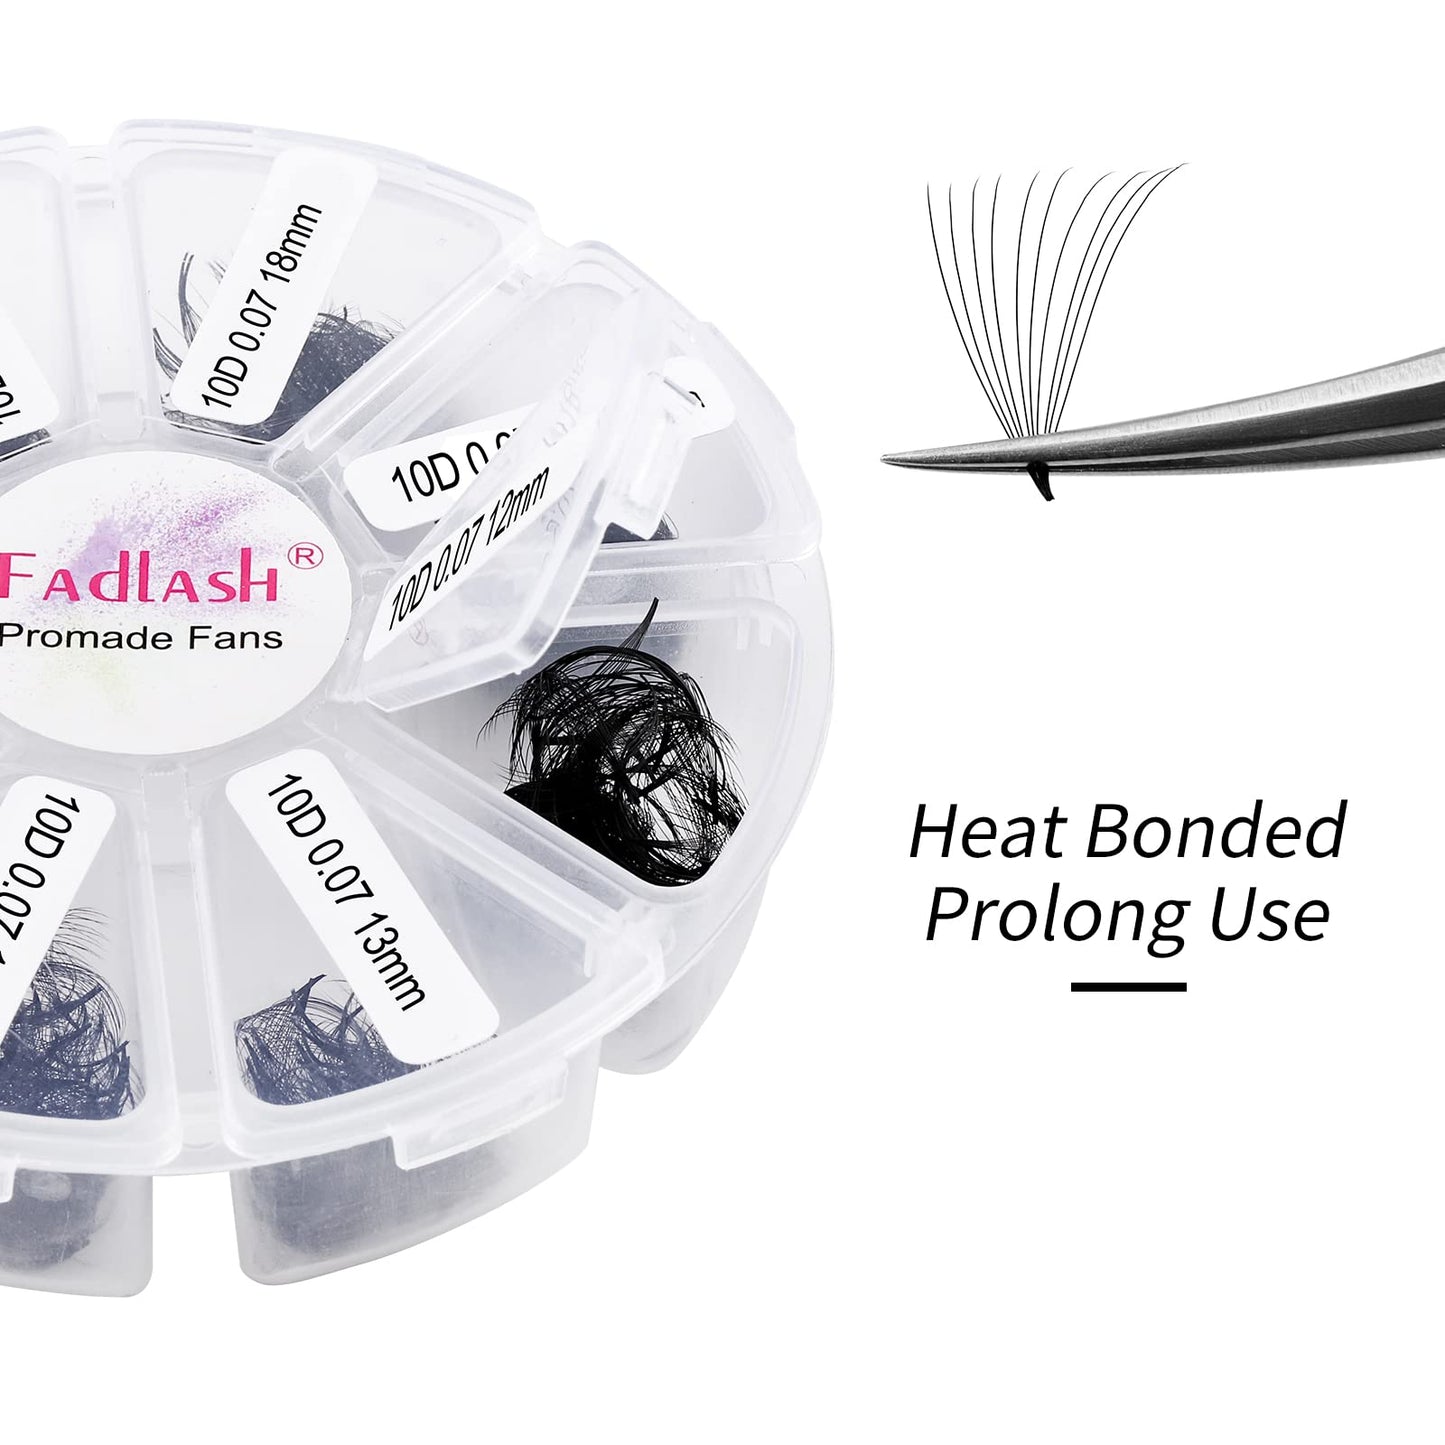 Lash Extension 1000 Fans/Tray Mixed Premade Fans Eyelash Extensions D Curl Promades Eyelash Volume Lash Extensions Loose Fans Pre Made Volume Lashes Pointed Base (10D-0.07D, 11-18mm)